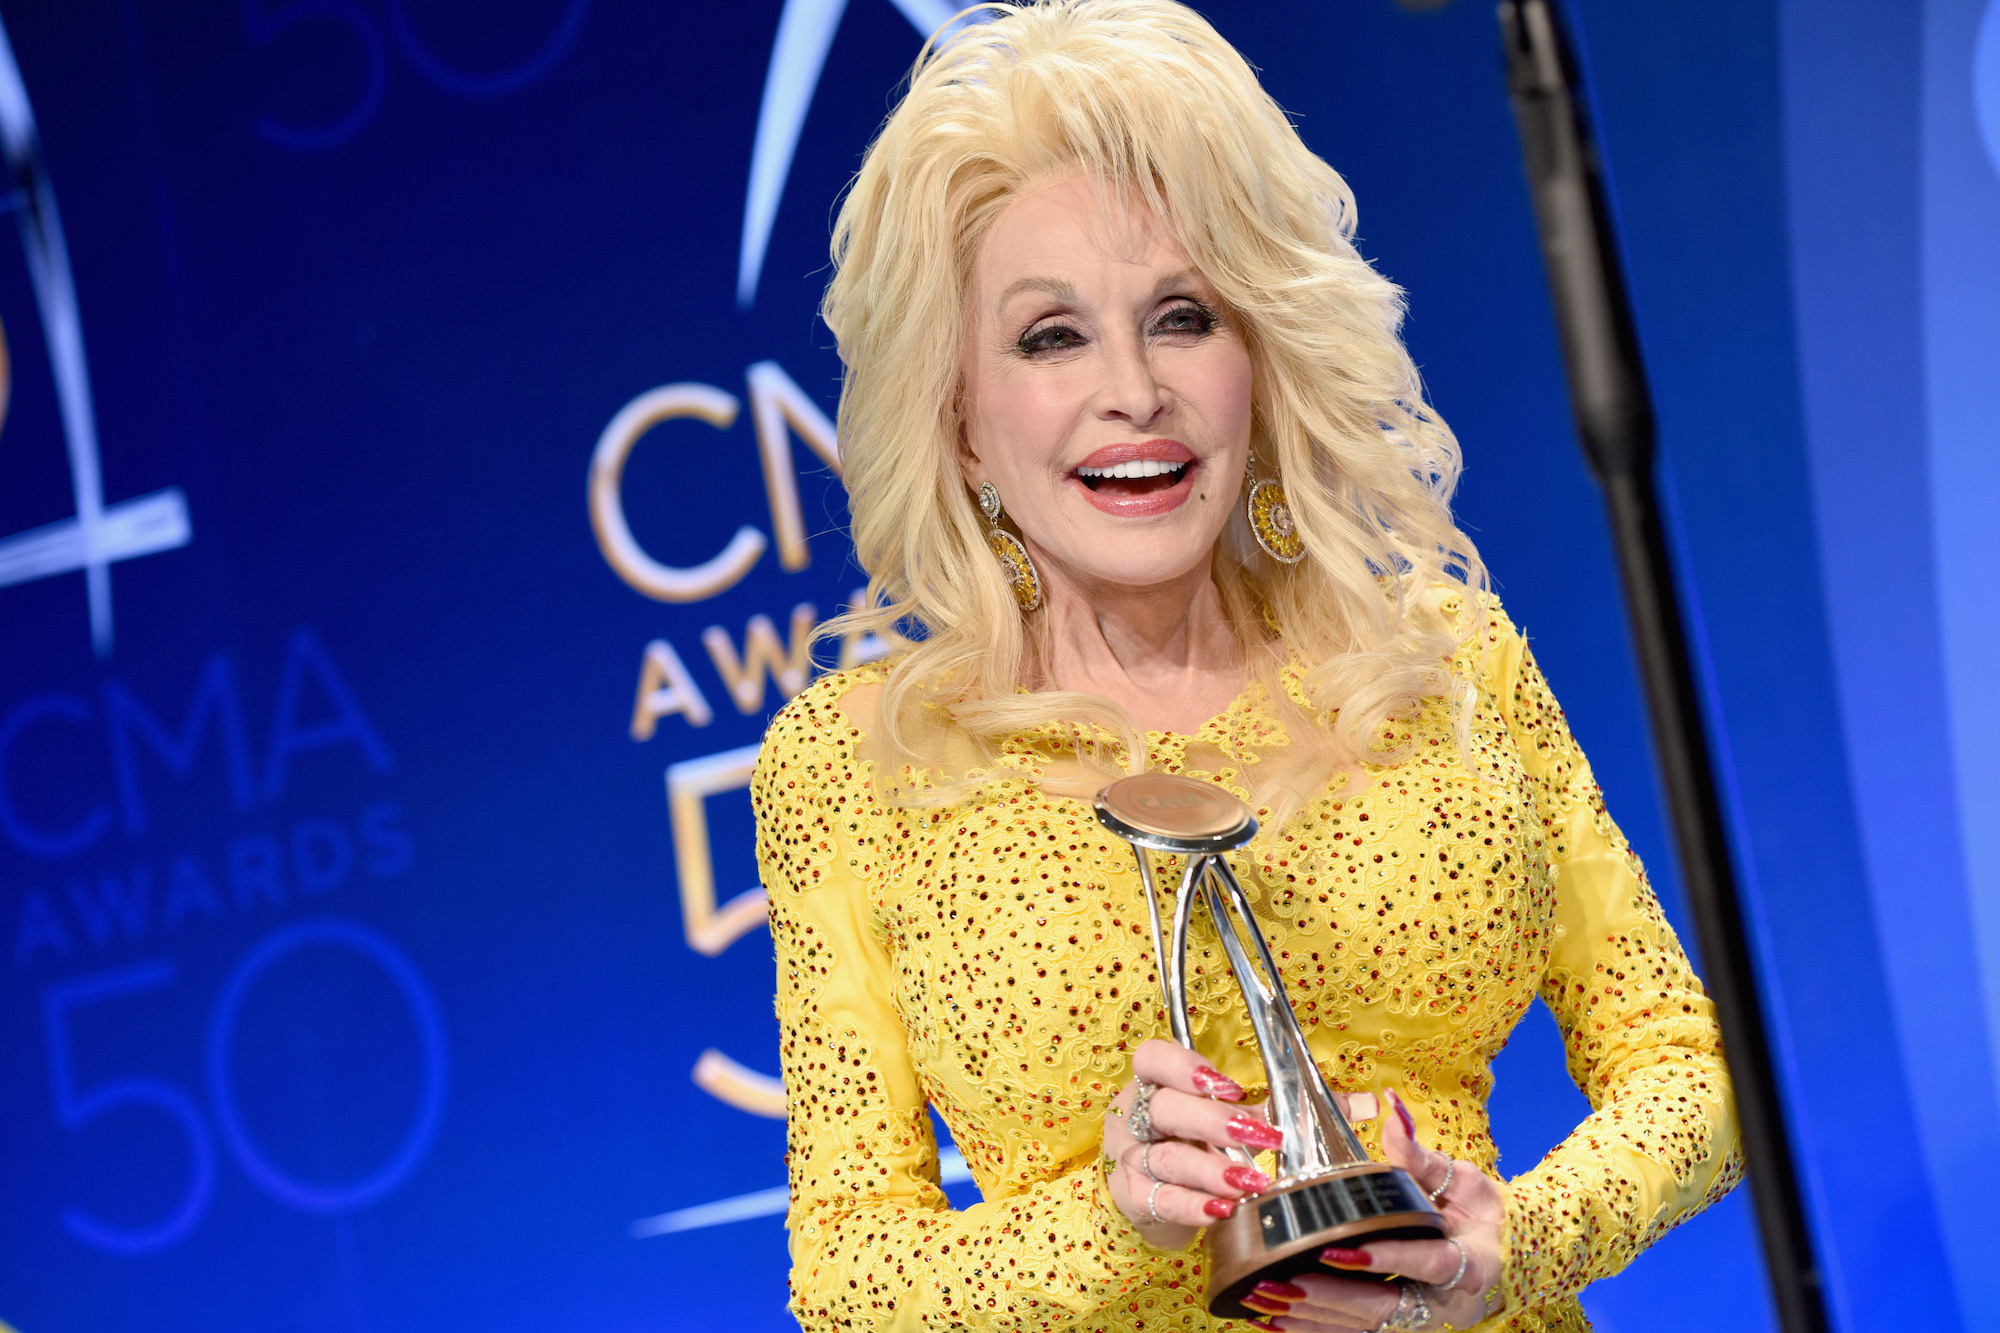 Dolly Parton attending The 50th Annual CMA Awards in 2016 